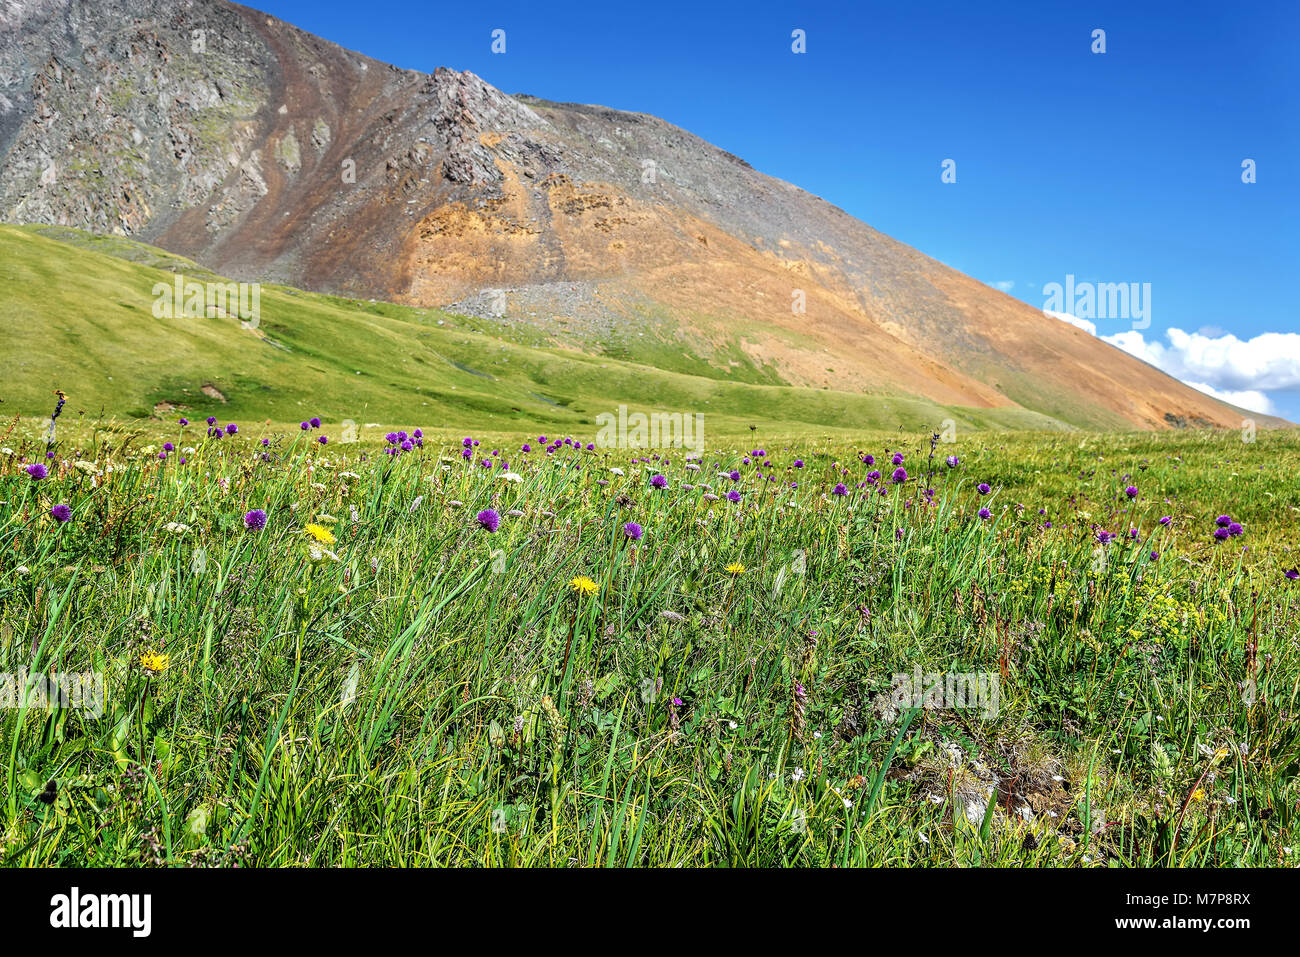 Purple wildflowers Allium schoenoprasum on a bright green alpine meadow against a background of mountains and a blue sky with clouds Stock Photo